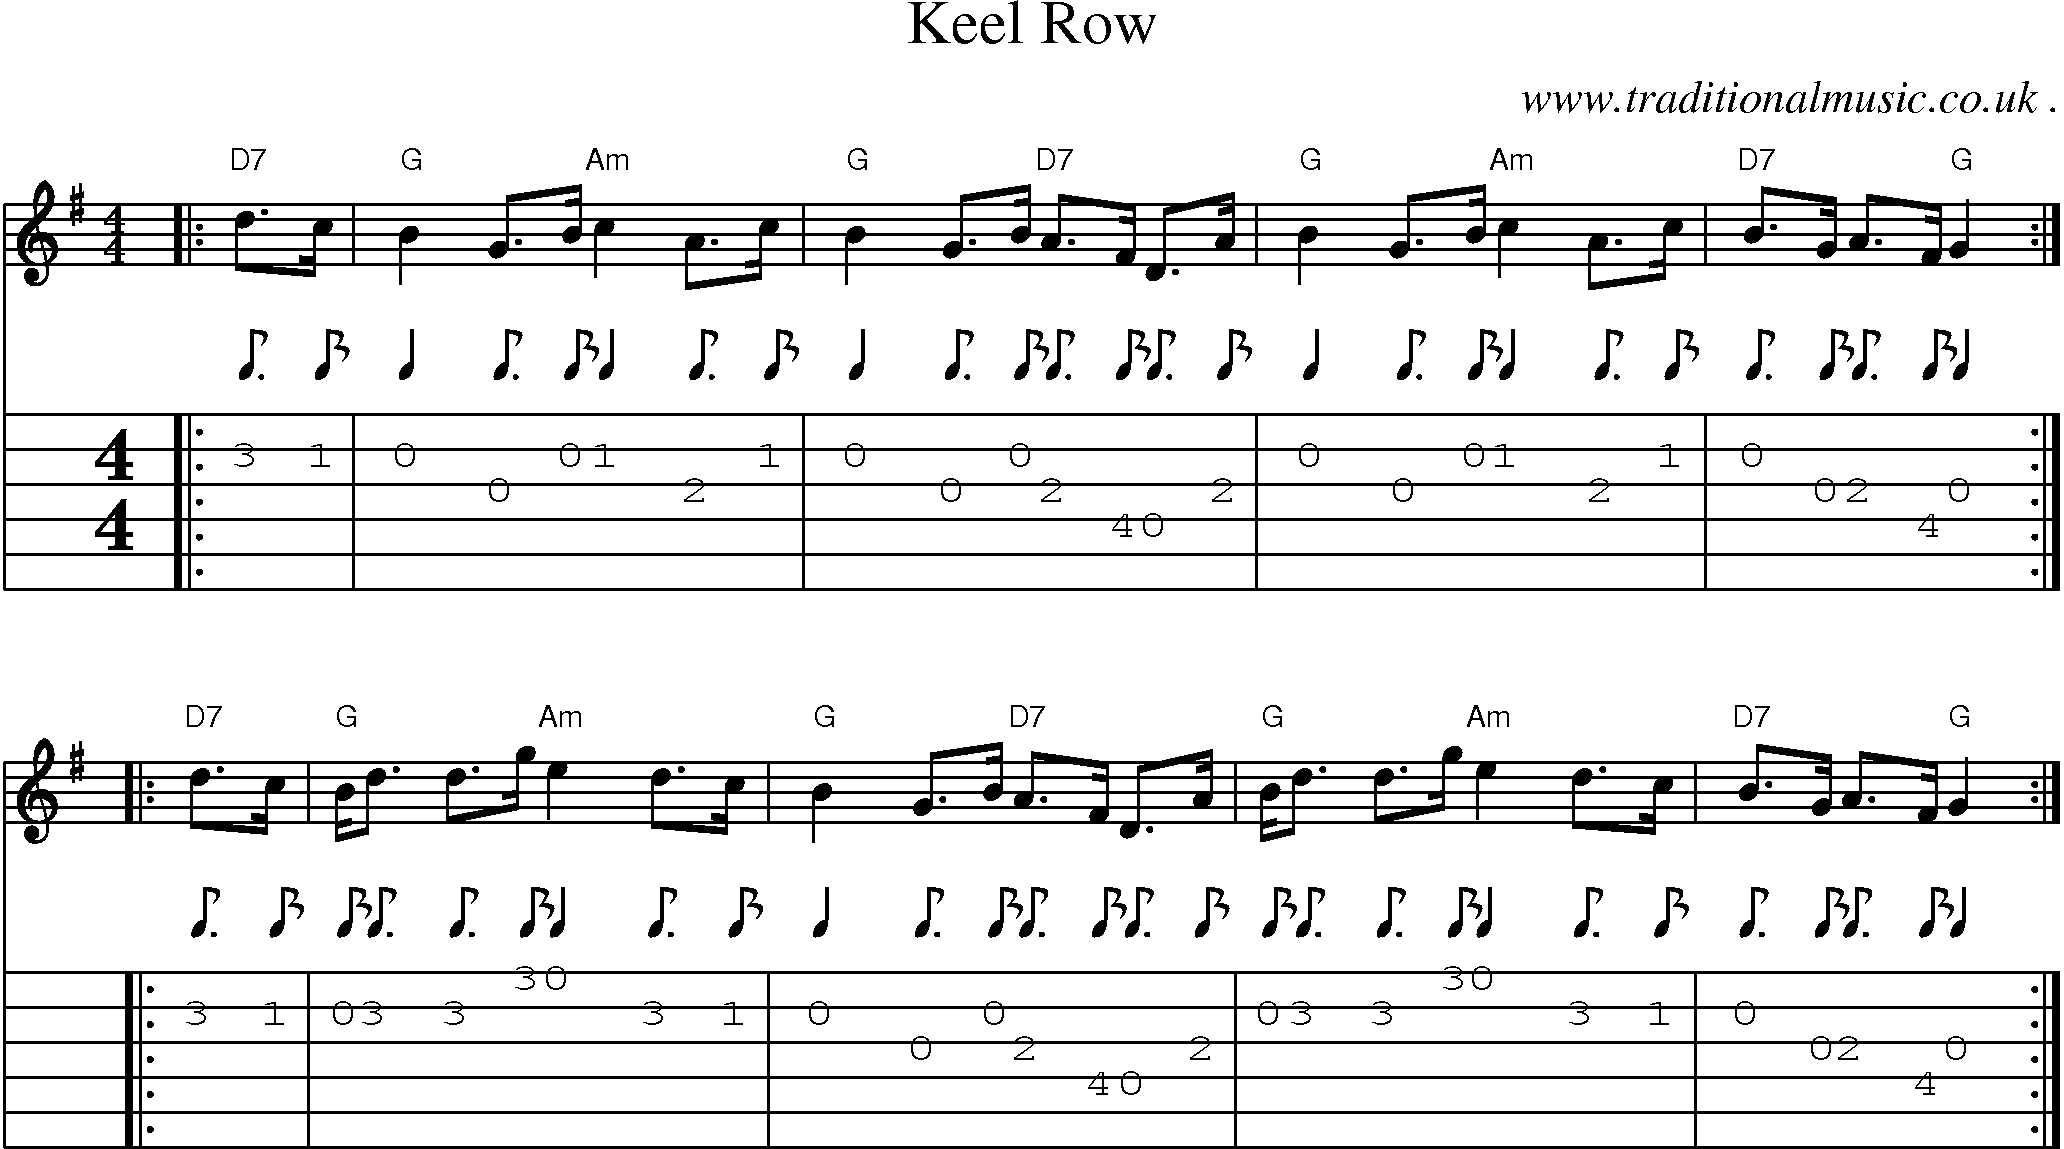 Sheet-music  score, Chords and Guitar Tabs for Keel Row